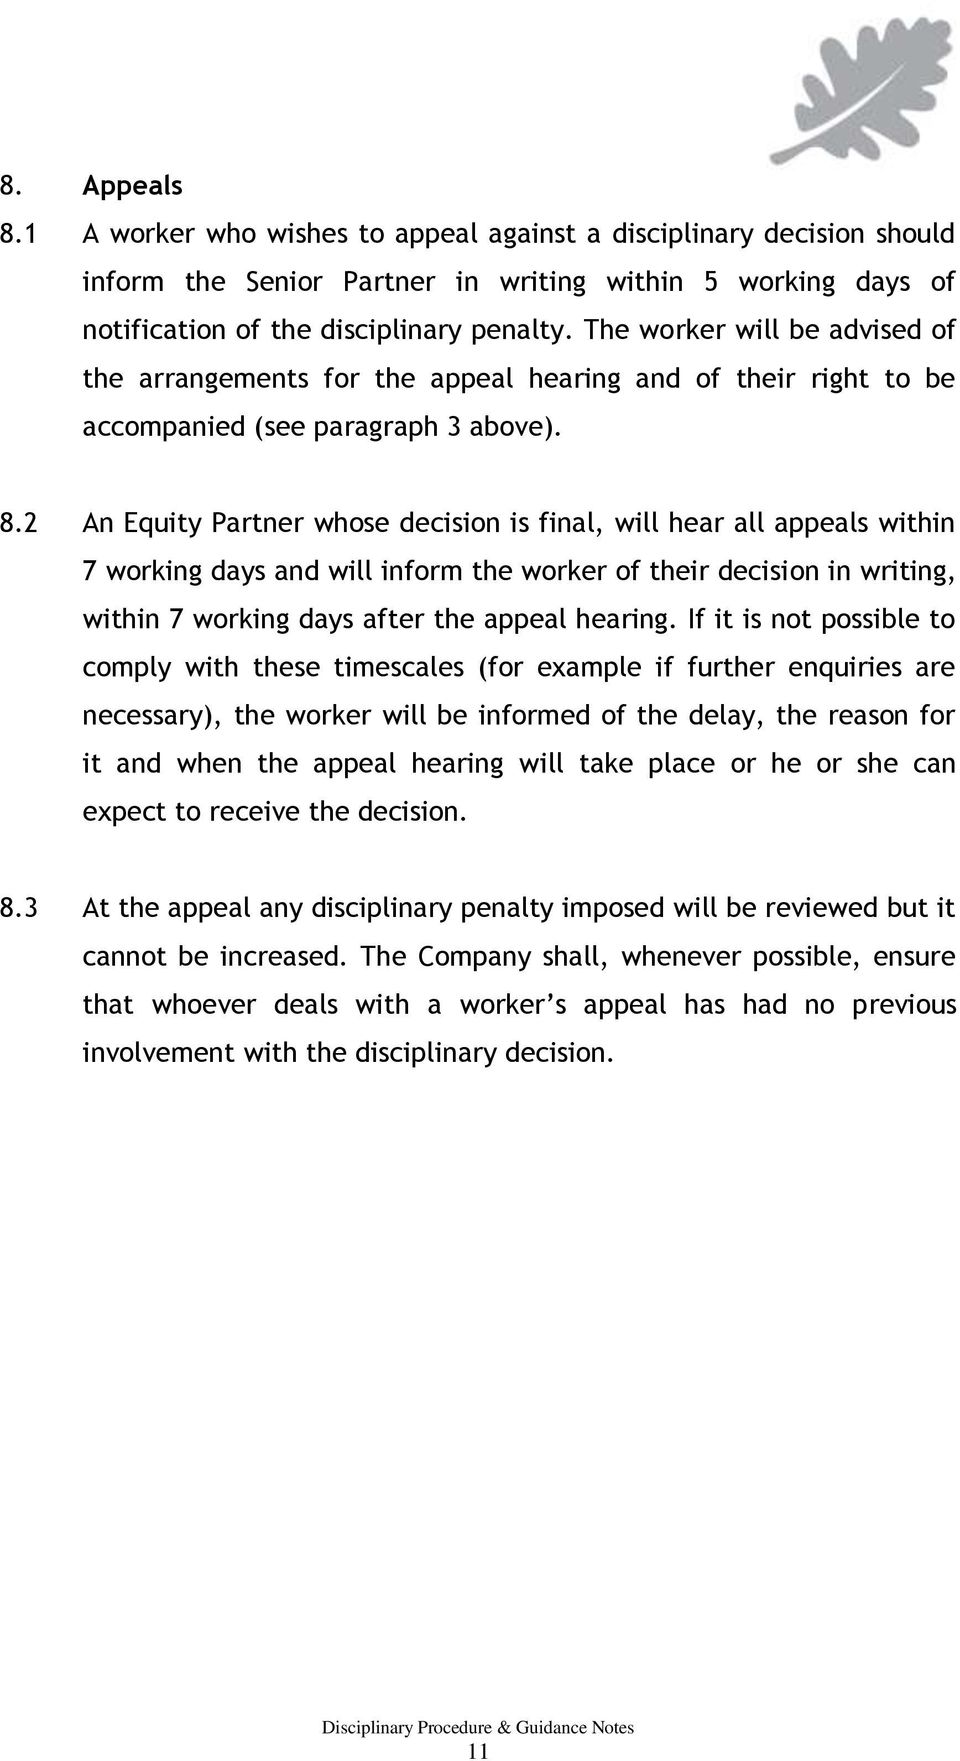 2 An Equity Partner whose decision is final, will hear all appeals within 7 working days and will inform the worker of their decision in writing, within 7 working days after the appeal hearing.